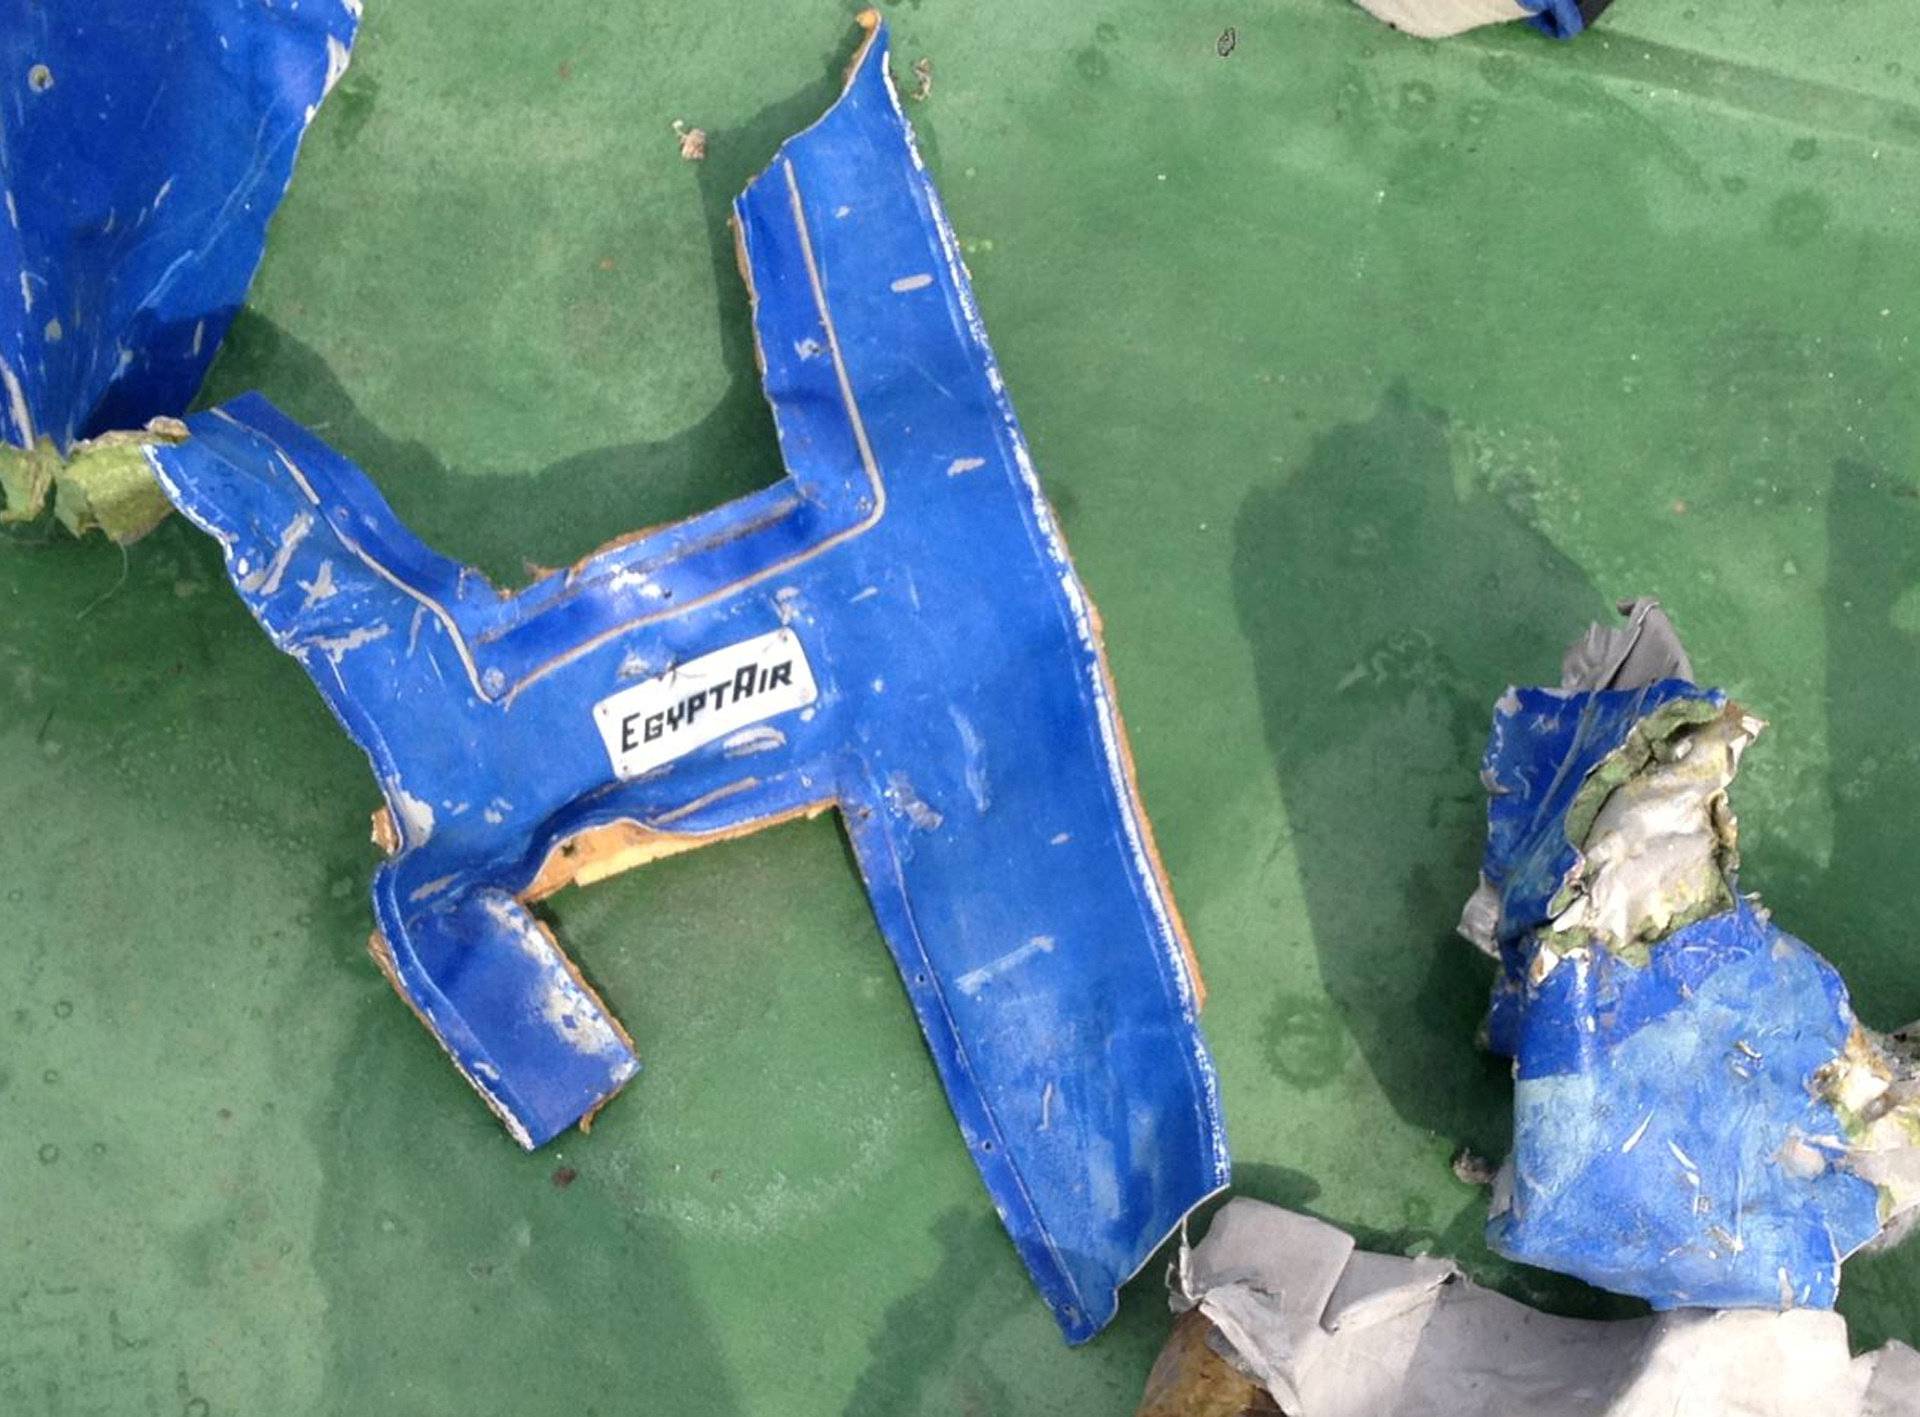 Recovered debris of the EgyptAir jet that crashed in the Mediterranean Sea are seen in this still image taken from video